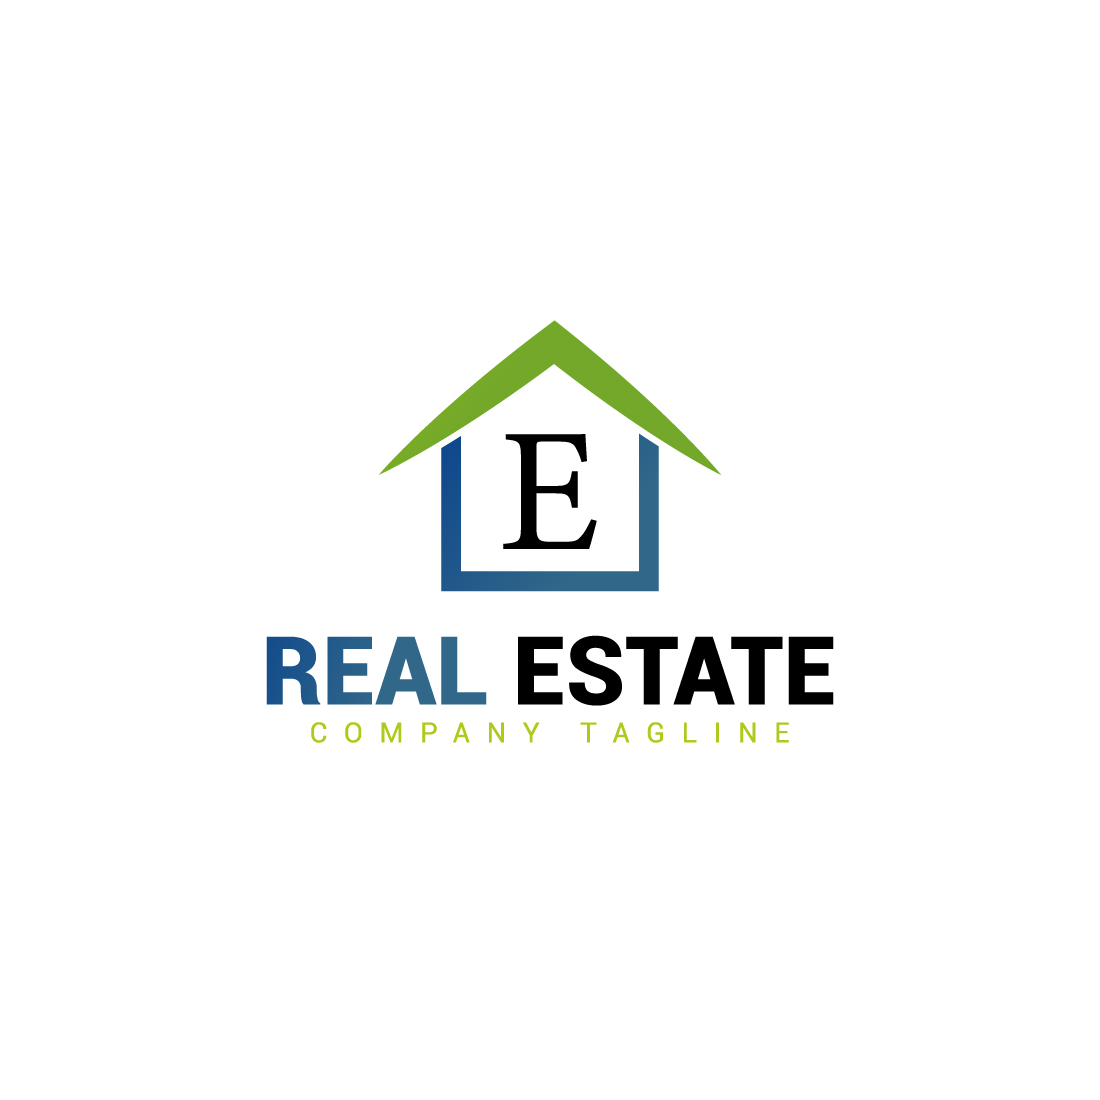 Real estate logo with green, dark blue color and E letter preview image.